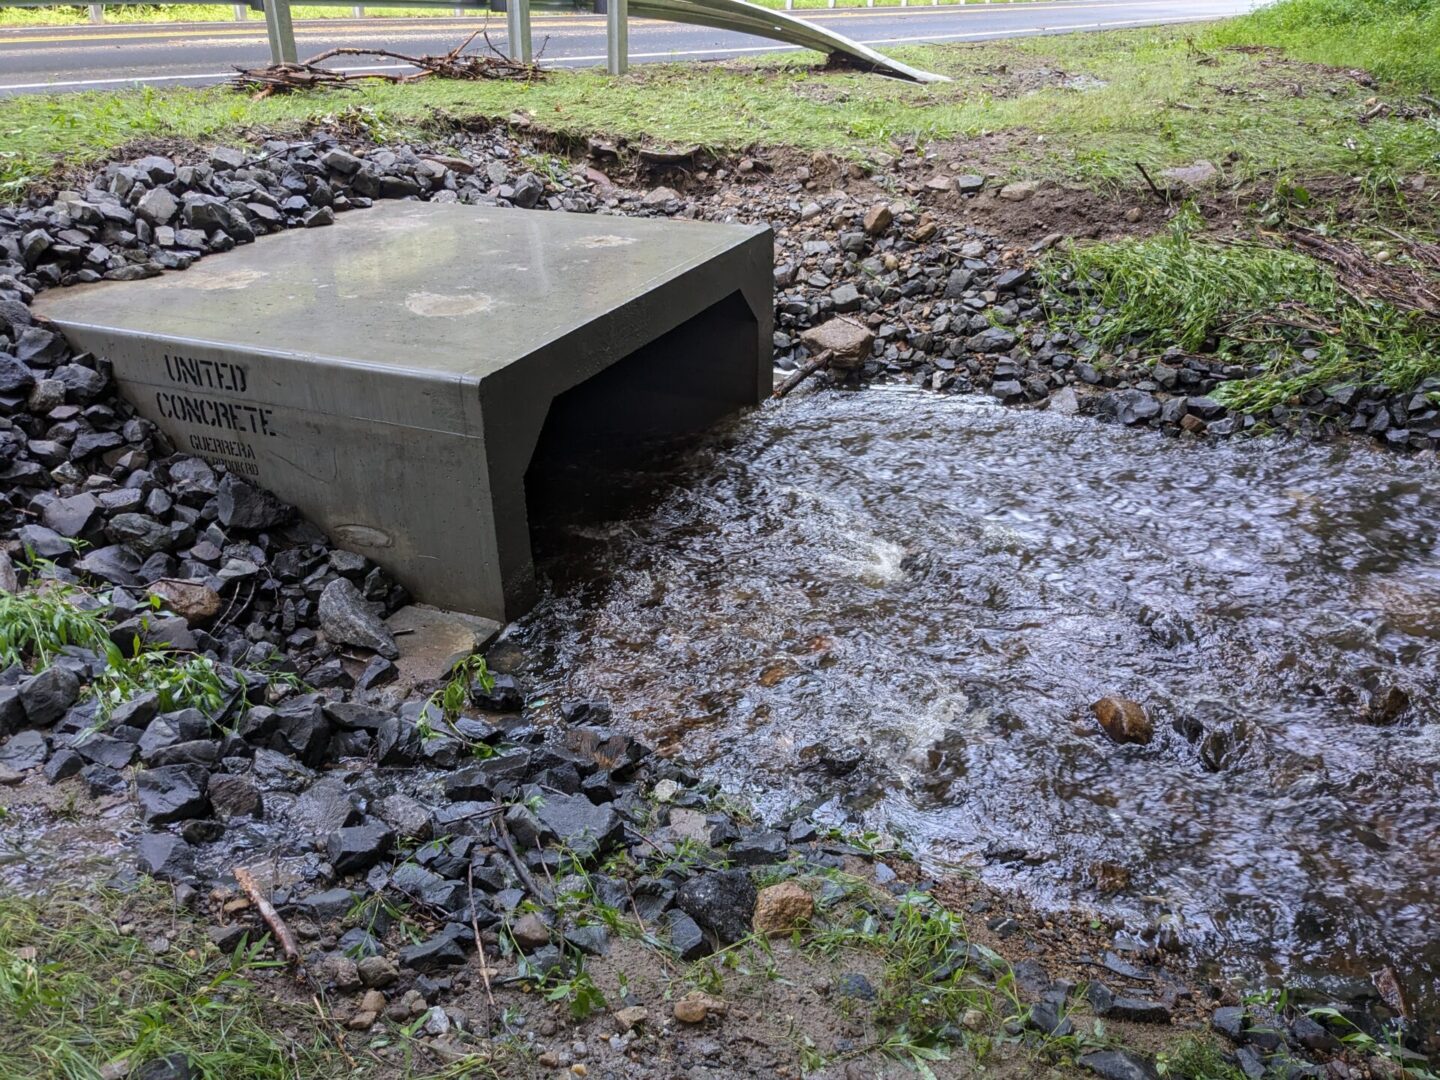 A concrete block sitting in the middle of a puddle.